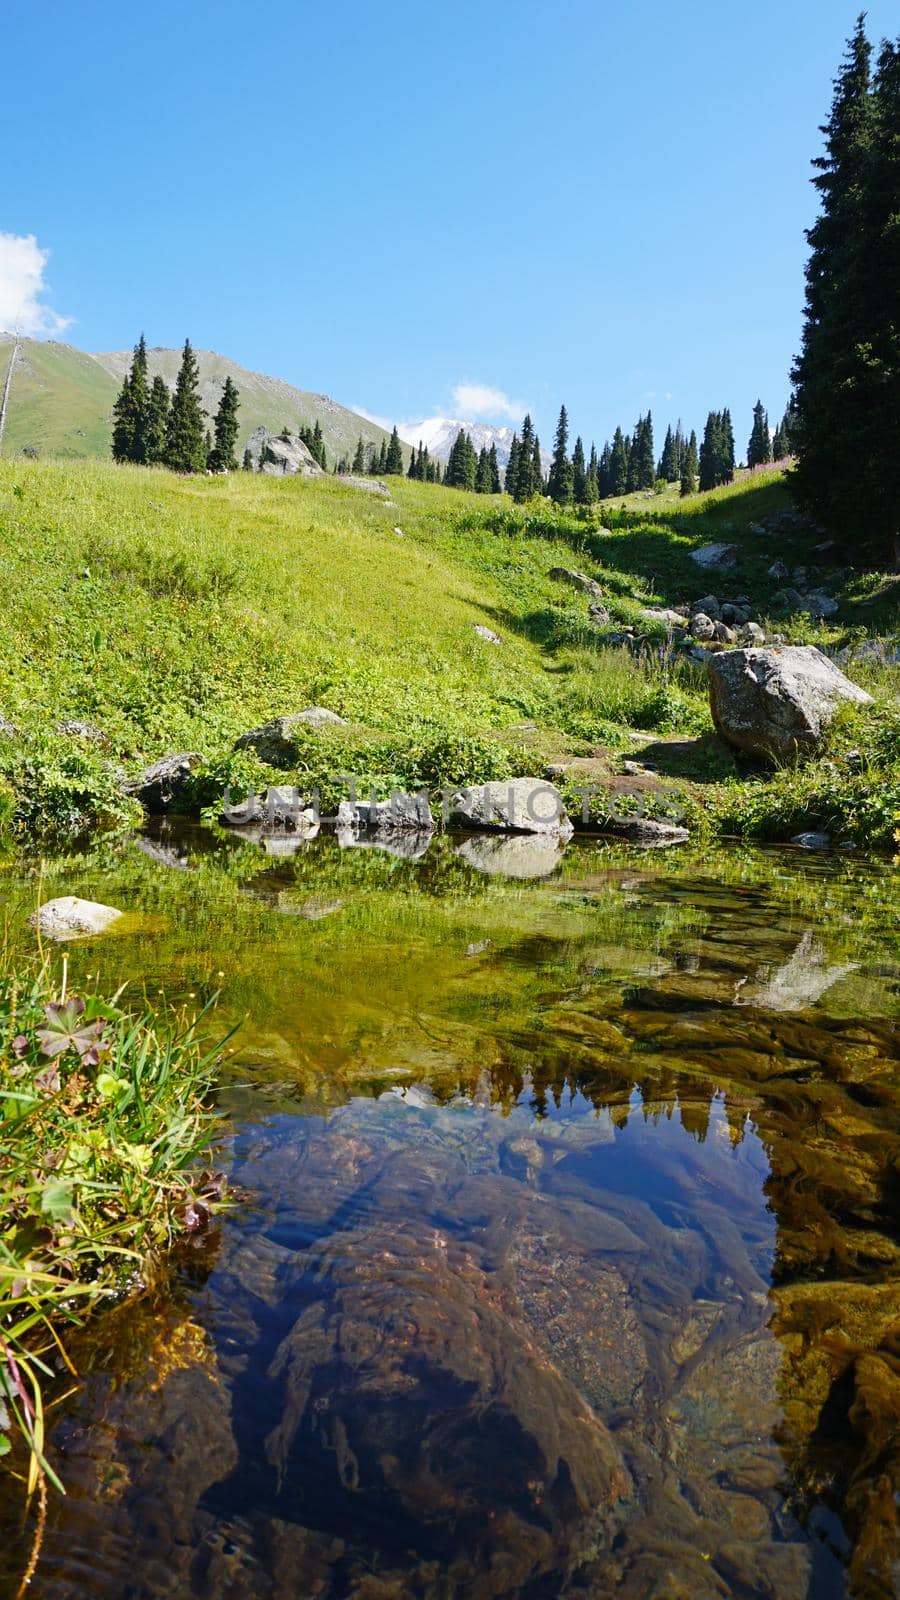 Mountain clear water of the stream and green fields. There are large stones on the shore. Grass is growing. Tall coniferous trees in forest. Tourists are walking in distance and flowers are growing